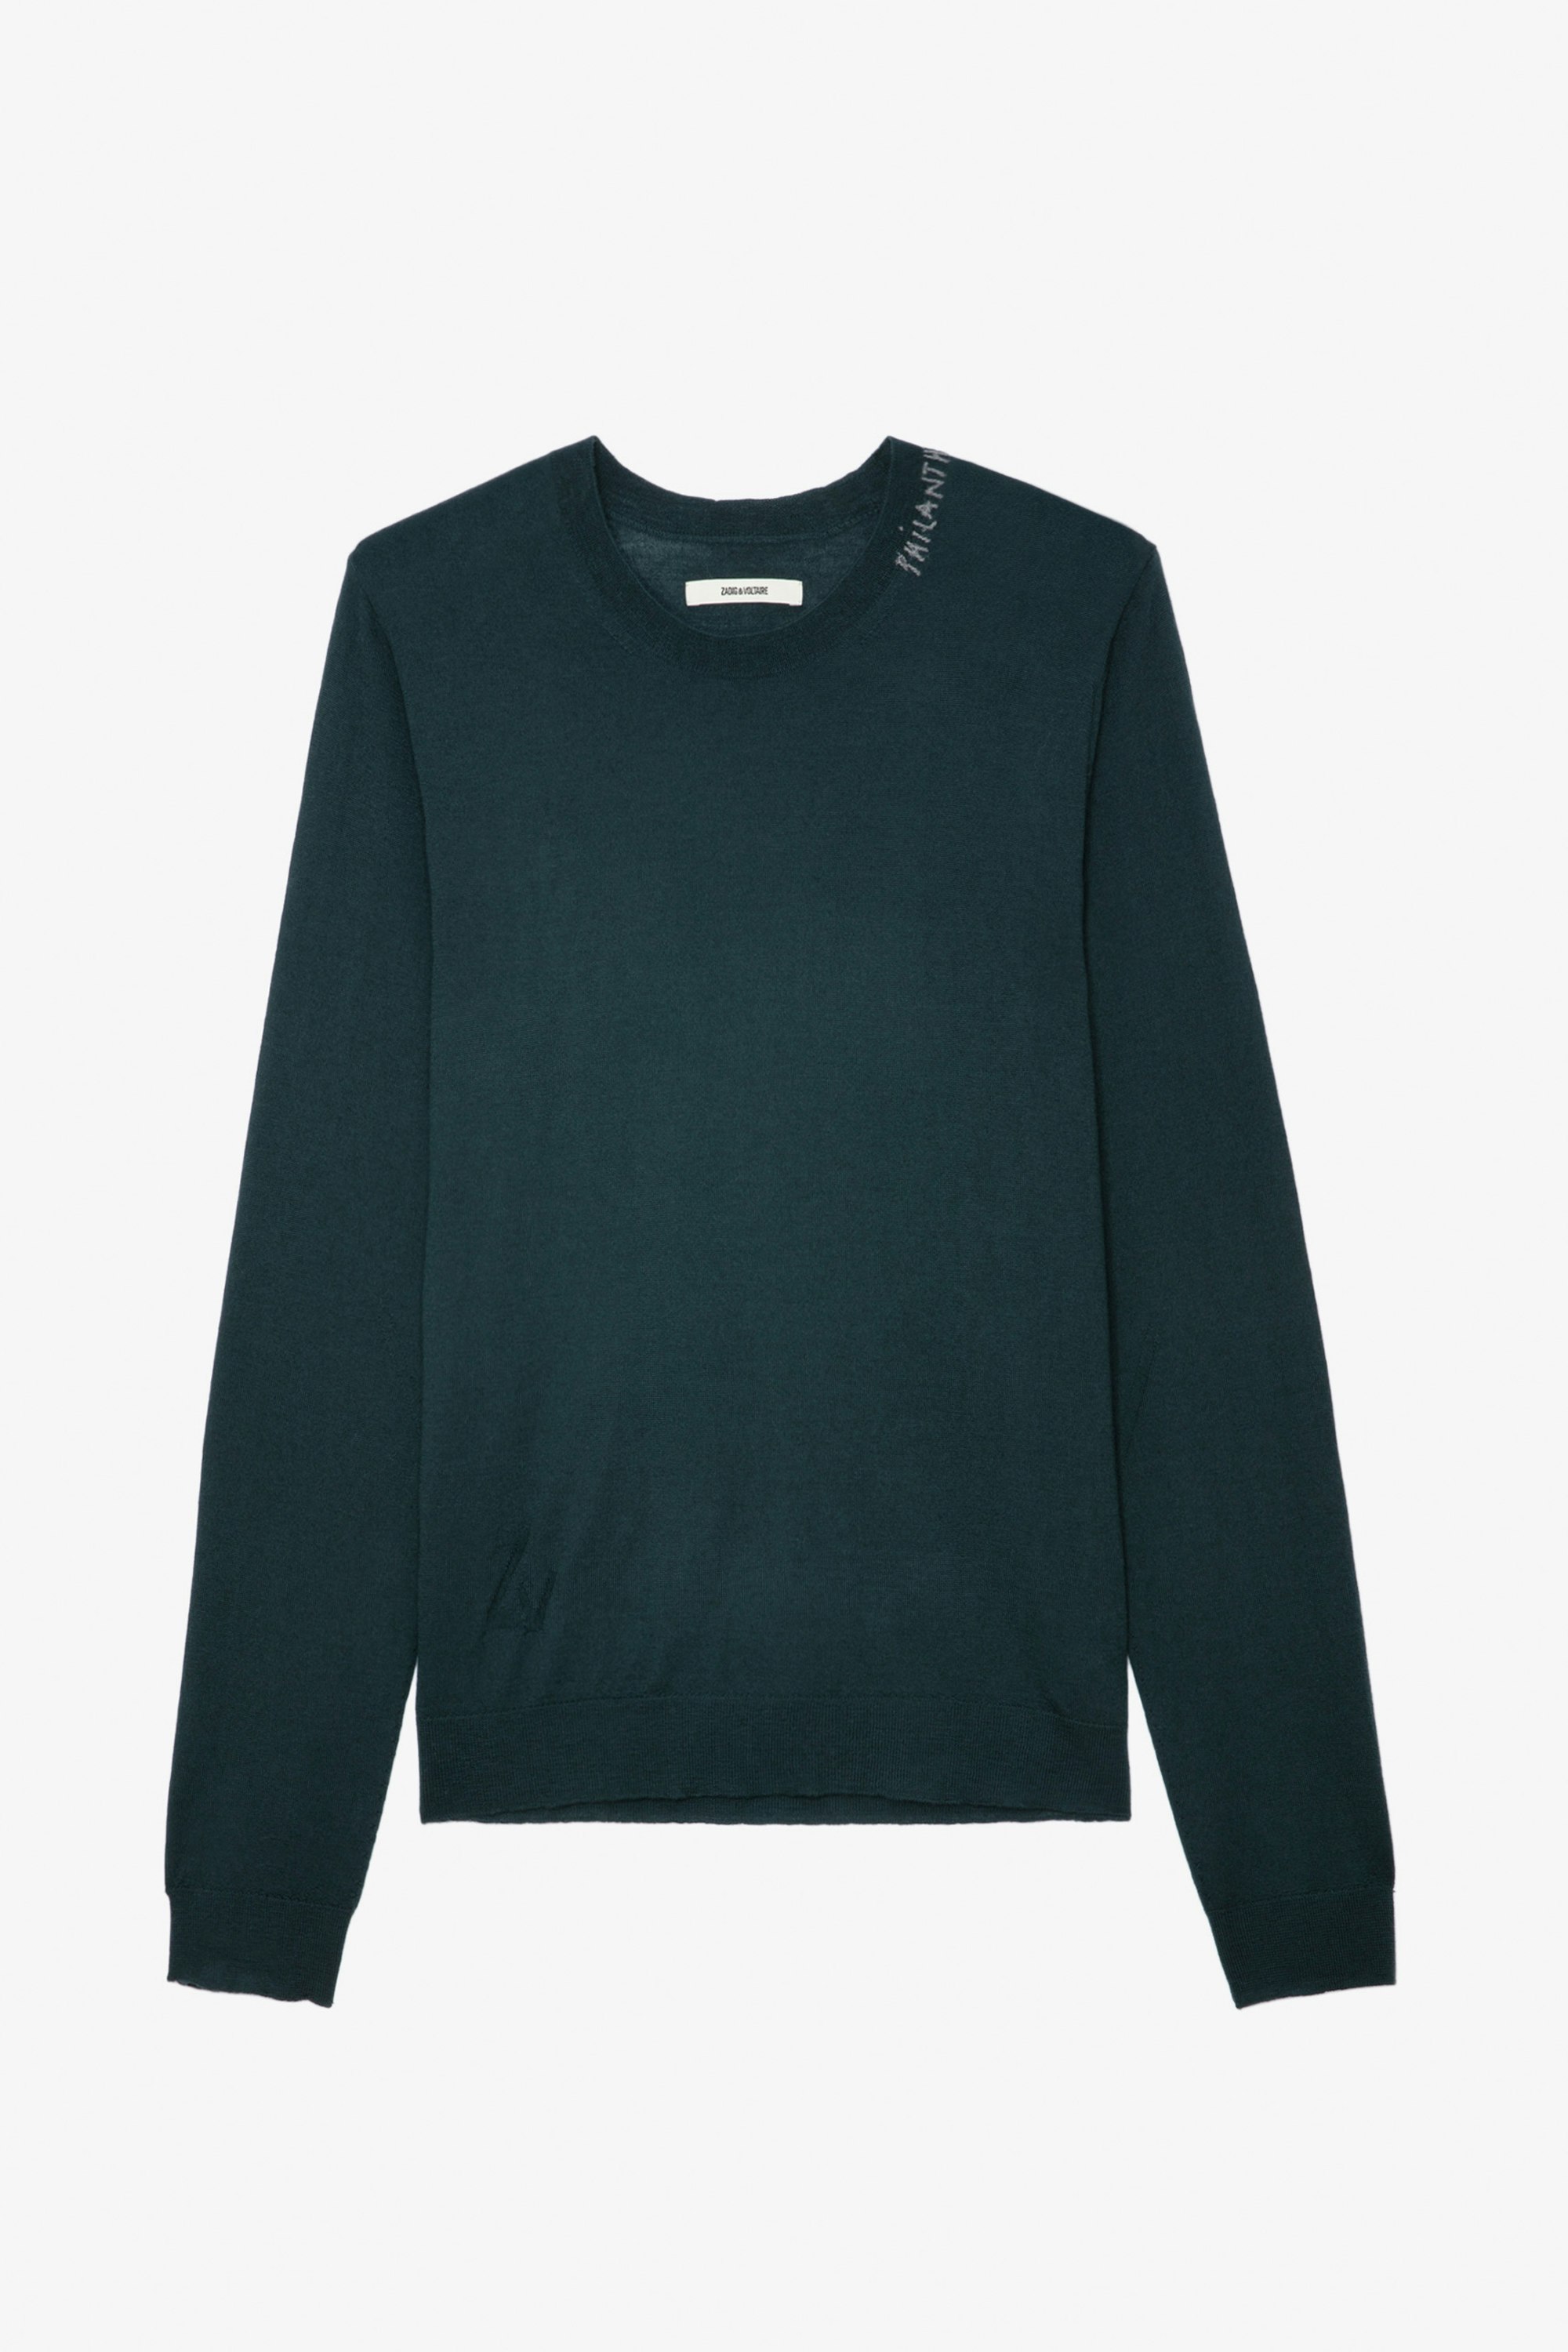 Kennedy Jumper - Men’s green merino wool jumper with “Philanthrope” embroidery on the neckline.